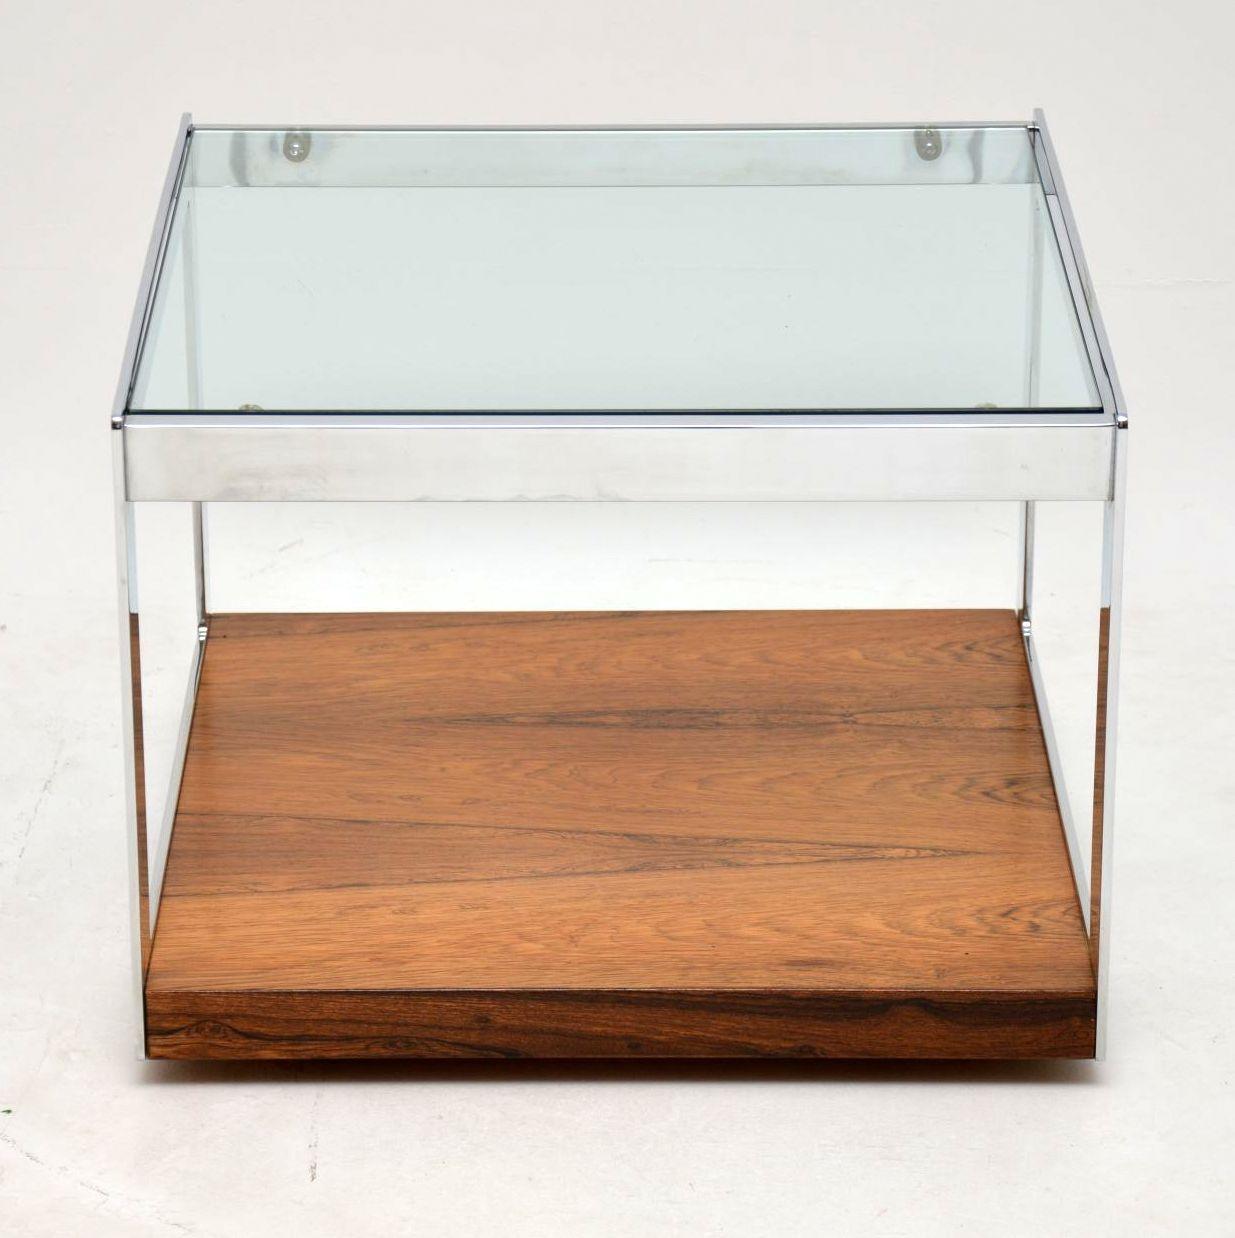 A stunning and extremely well made vintage coffee table designed by Richard Young for Merrow Associates, this dates from the 1970s. It has a fantastic chromed steel frame, toughened glass top. The condition is excellent, there is only some extremely